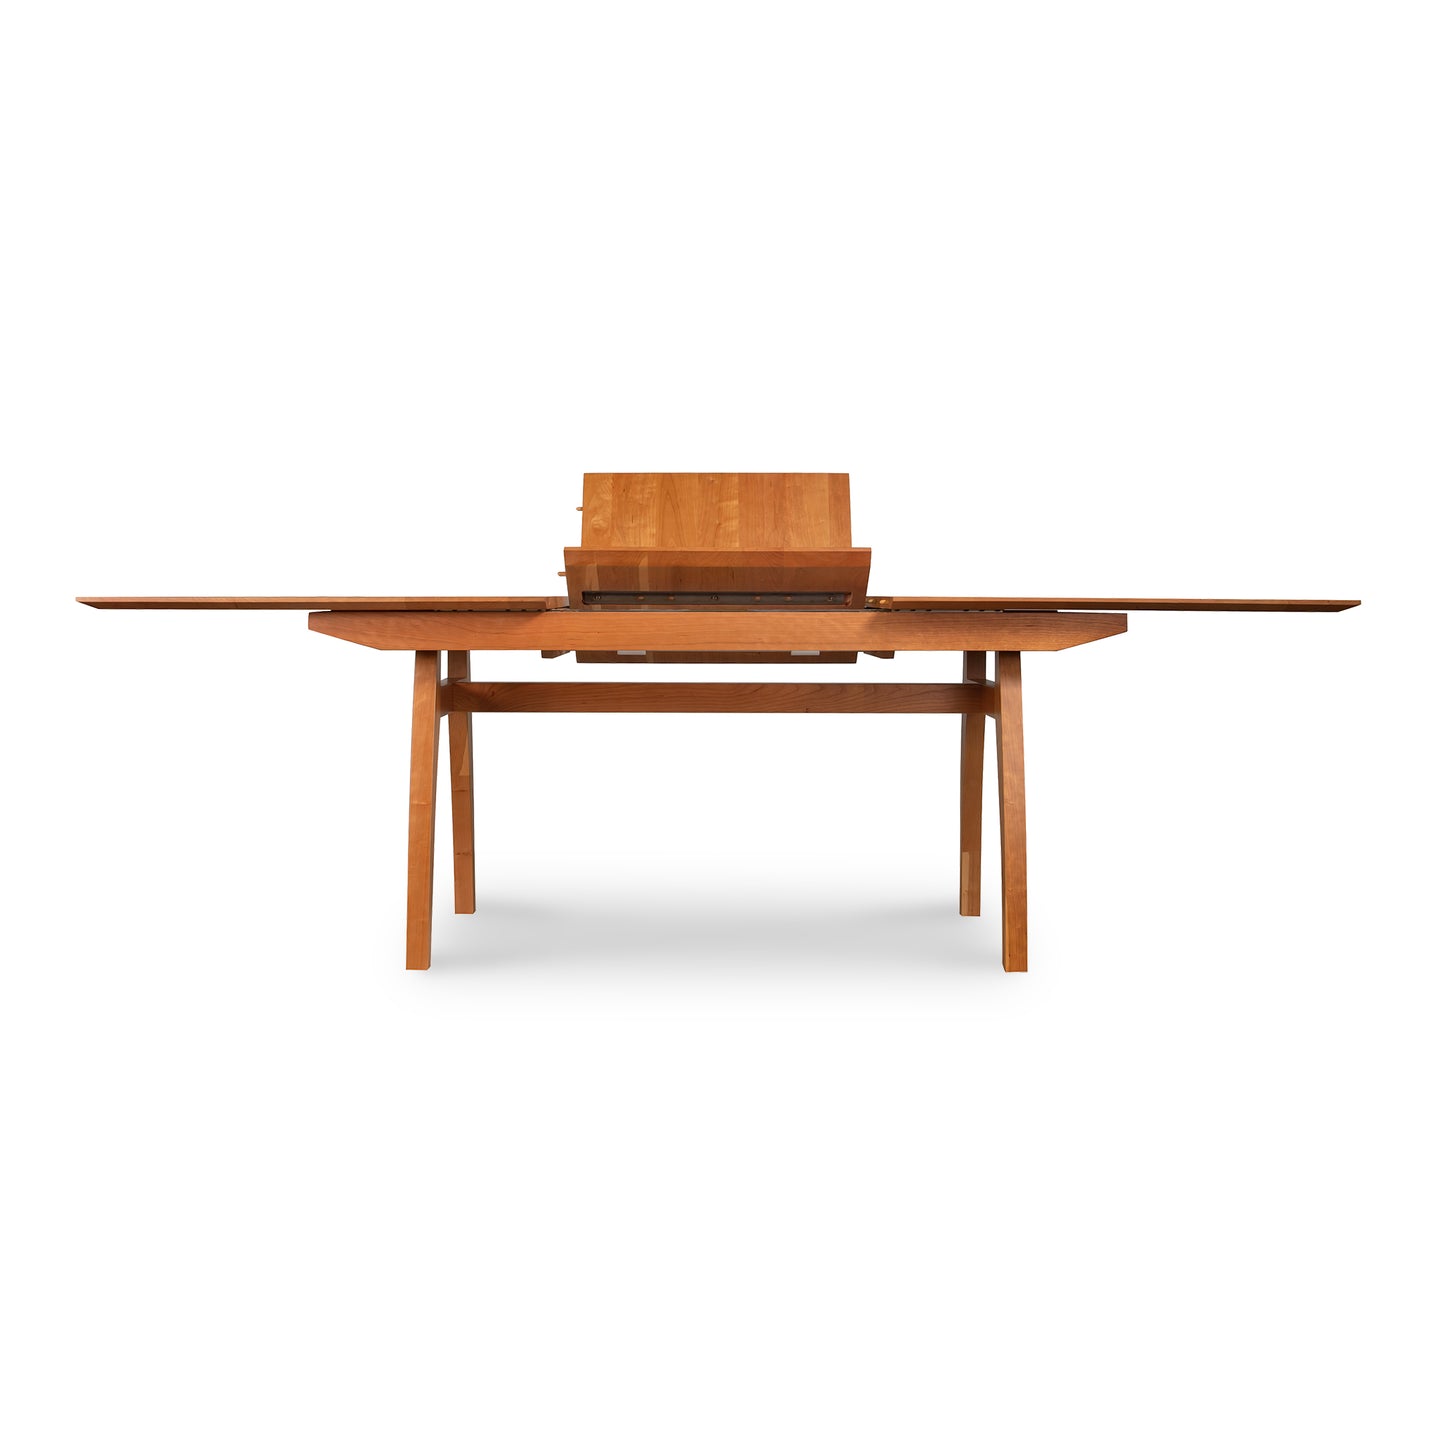 Vermont Modern Butterfly Extension Table - Floor Model